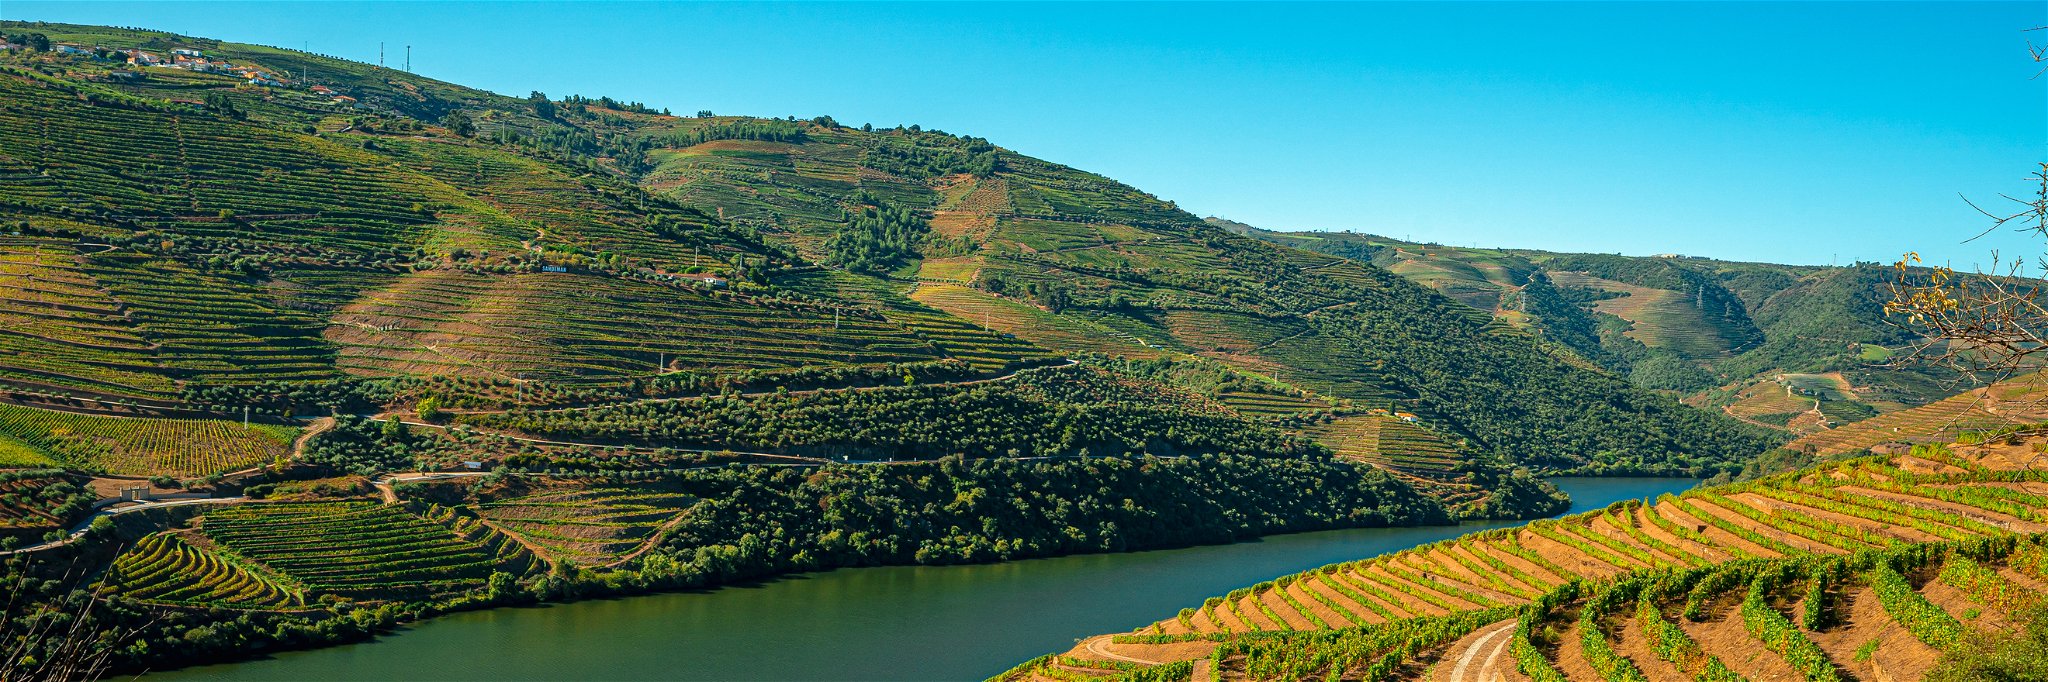 Viosinho is a common grape variety in the Douro Valley.&nbsp;